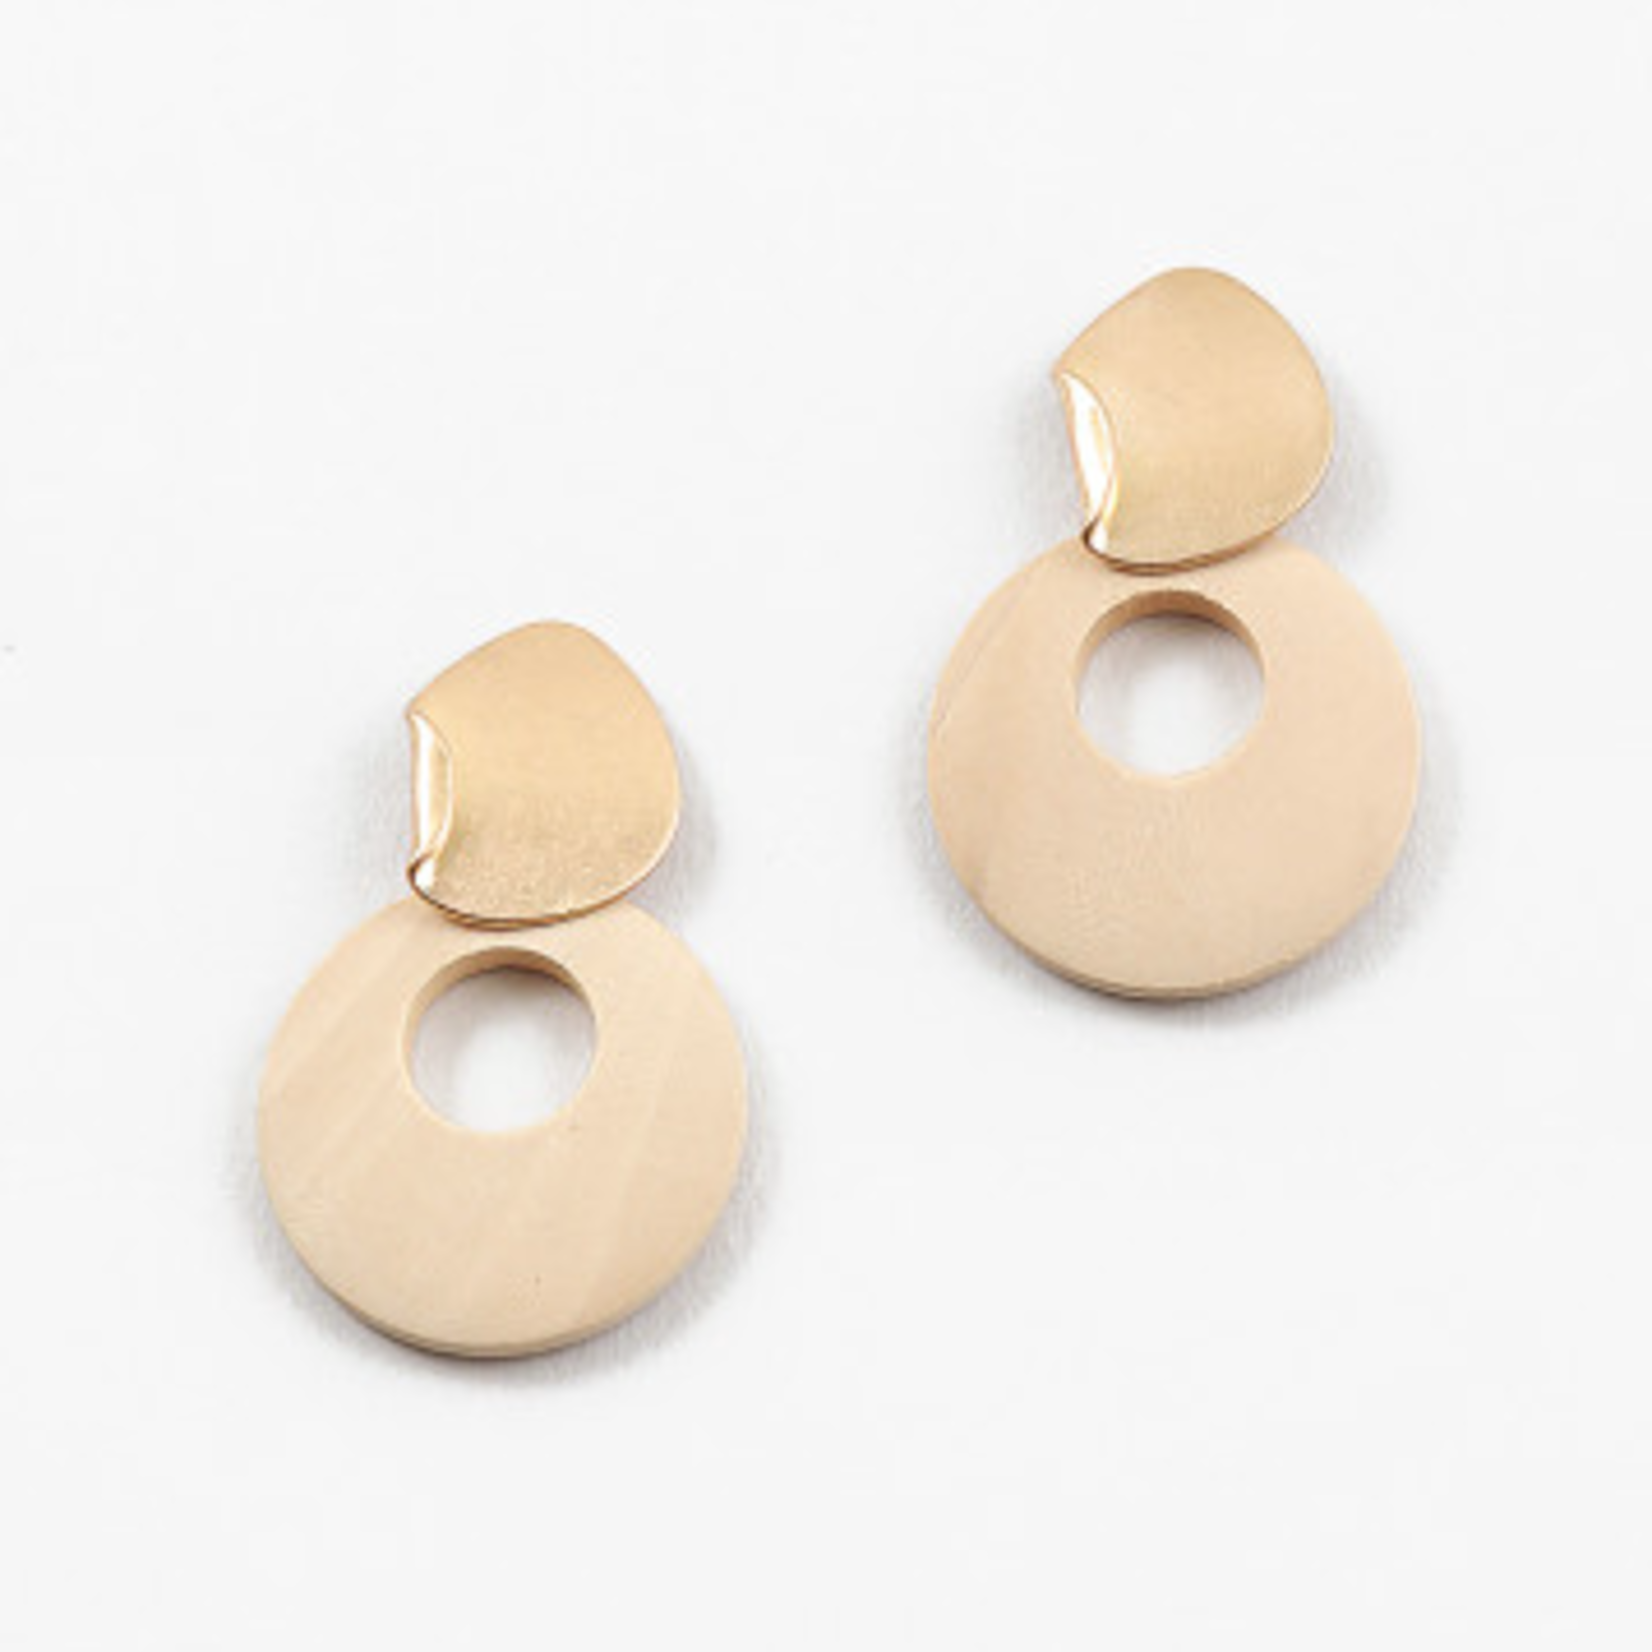 Mod Gold and Light Wood Earrings